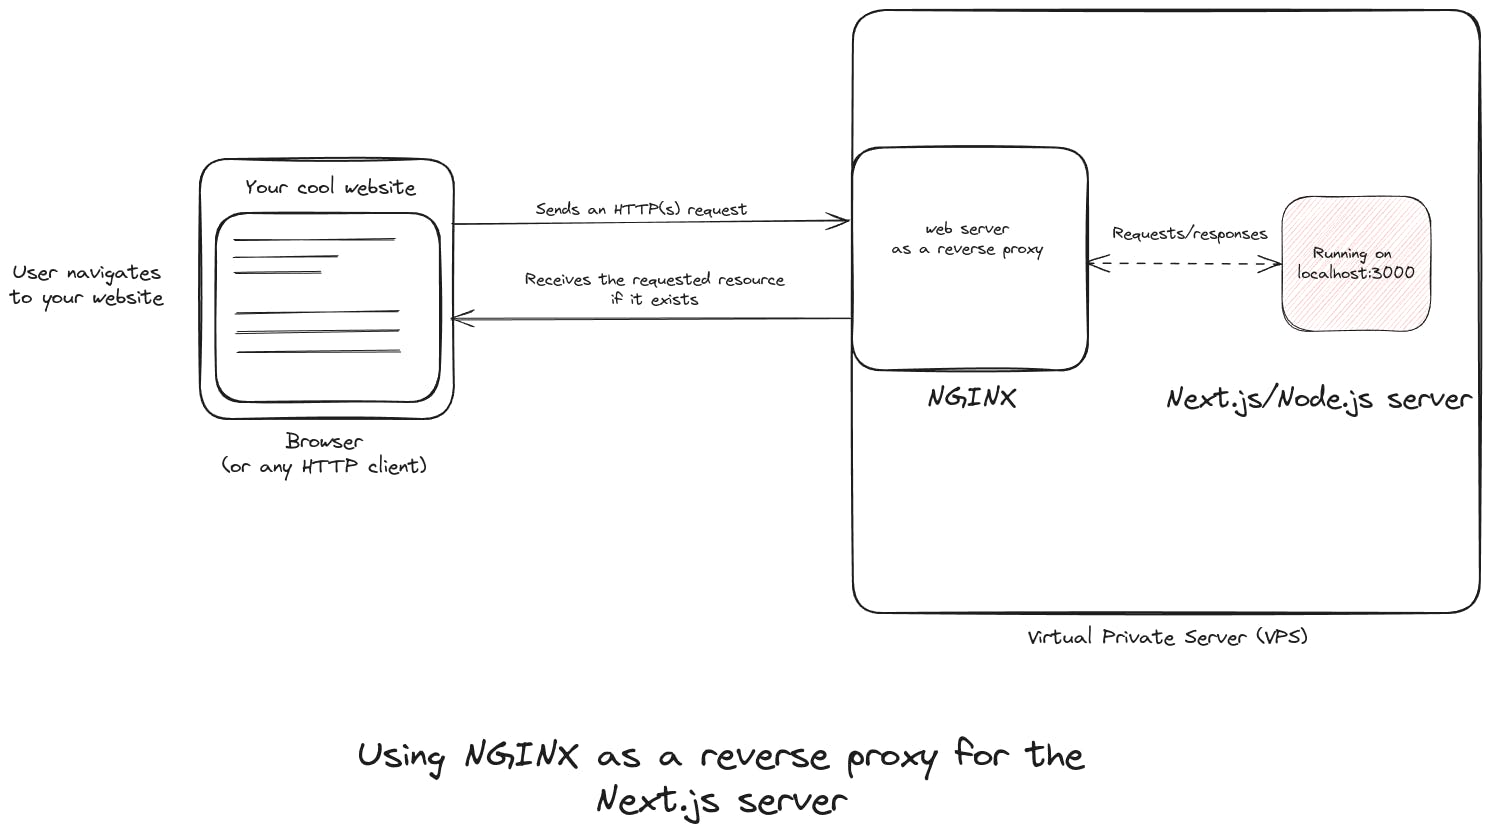 Using NGINX as a reverse proxy for the Next.js server